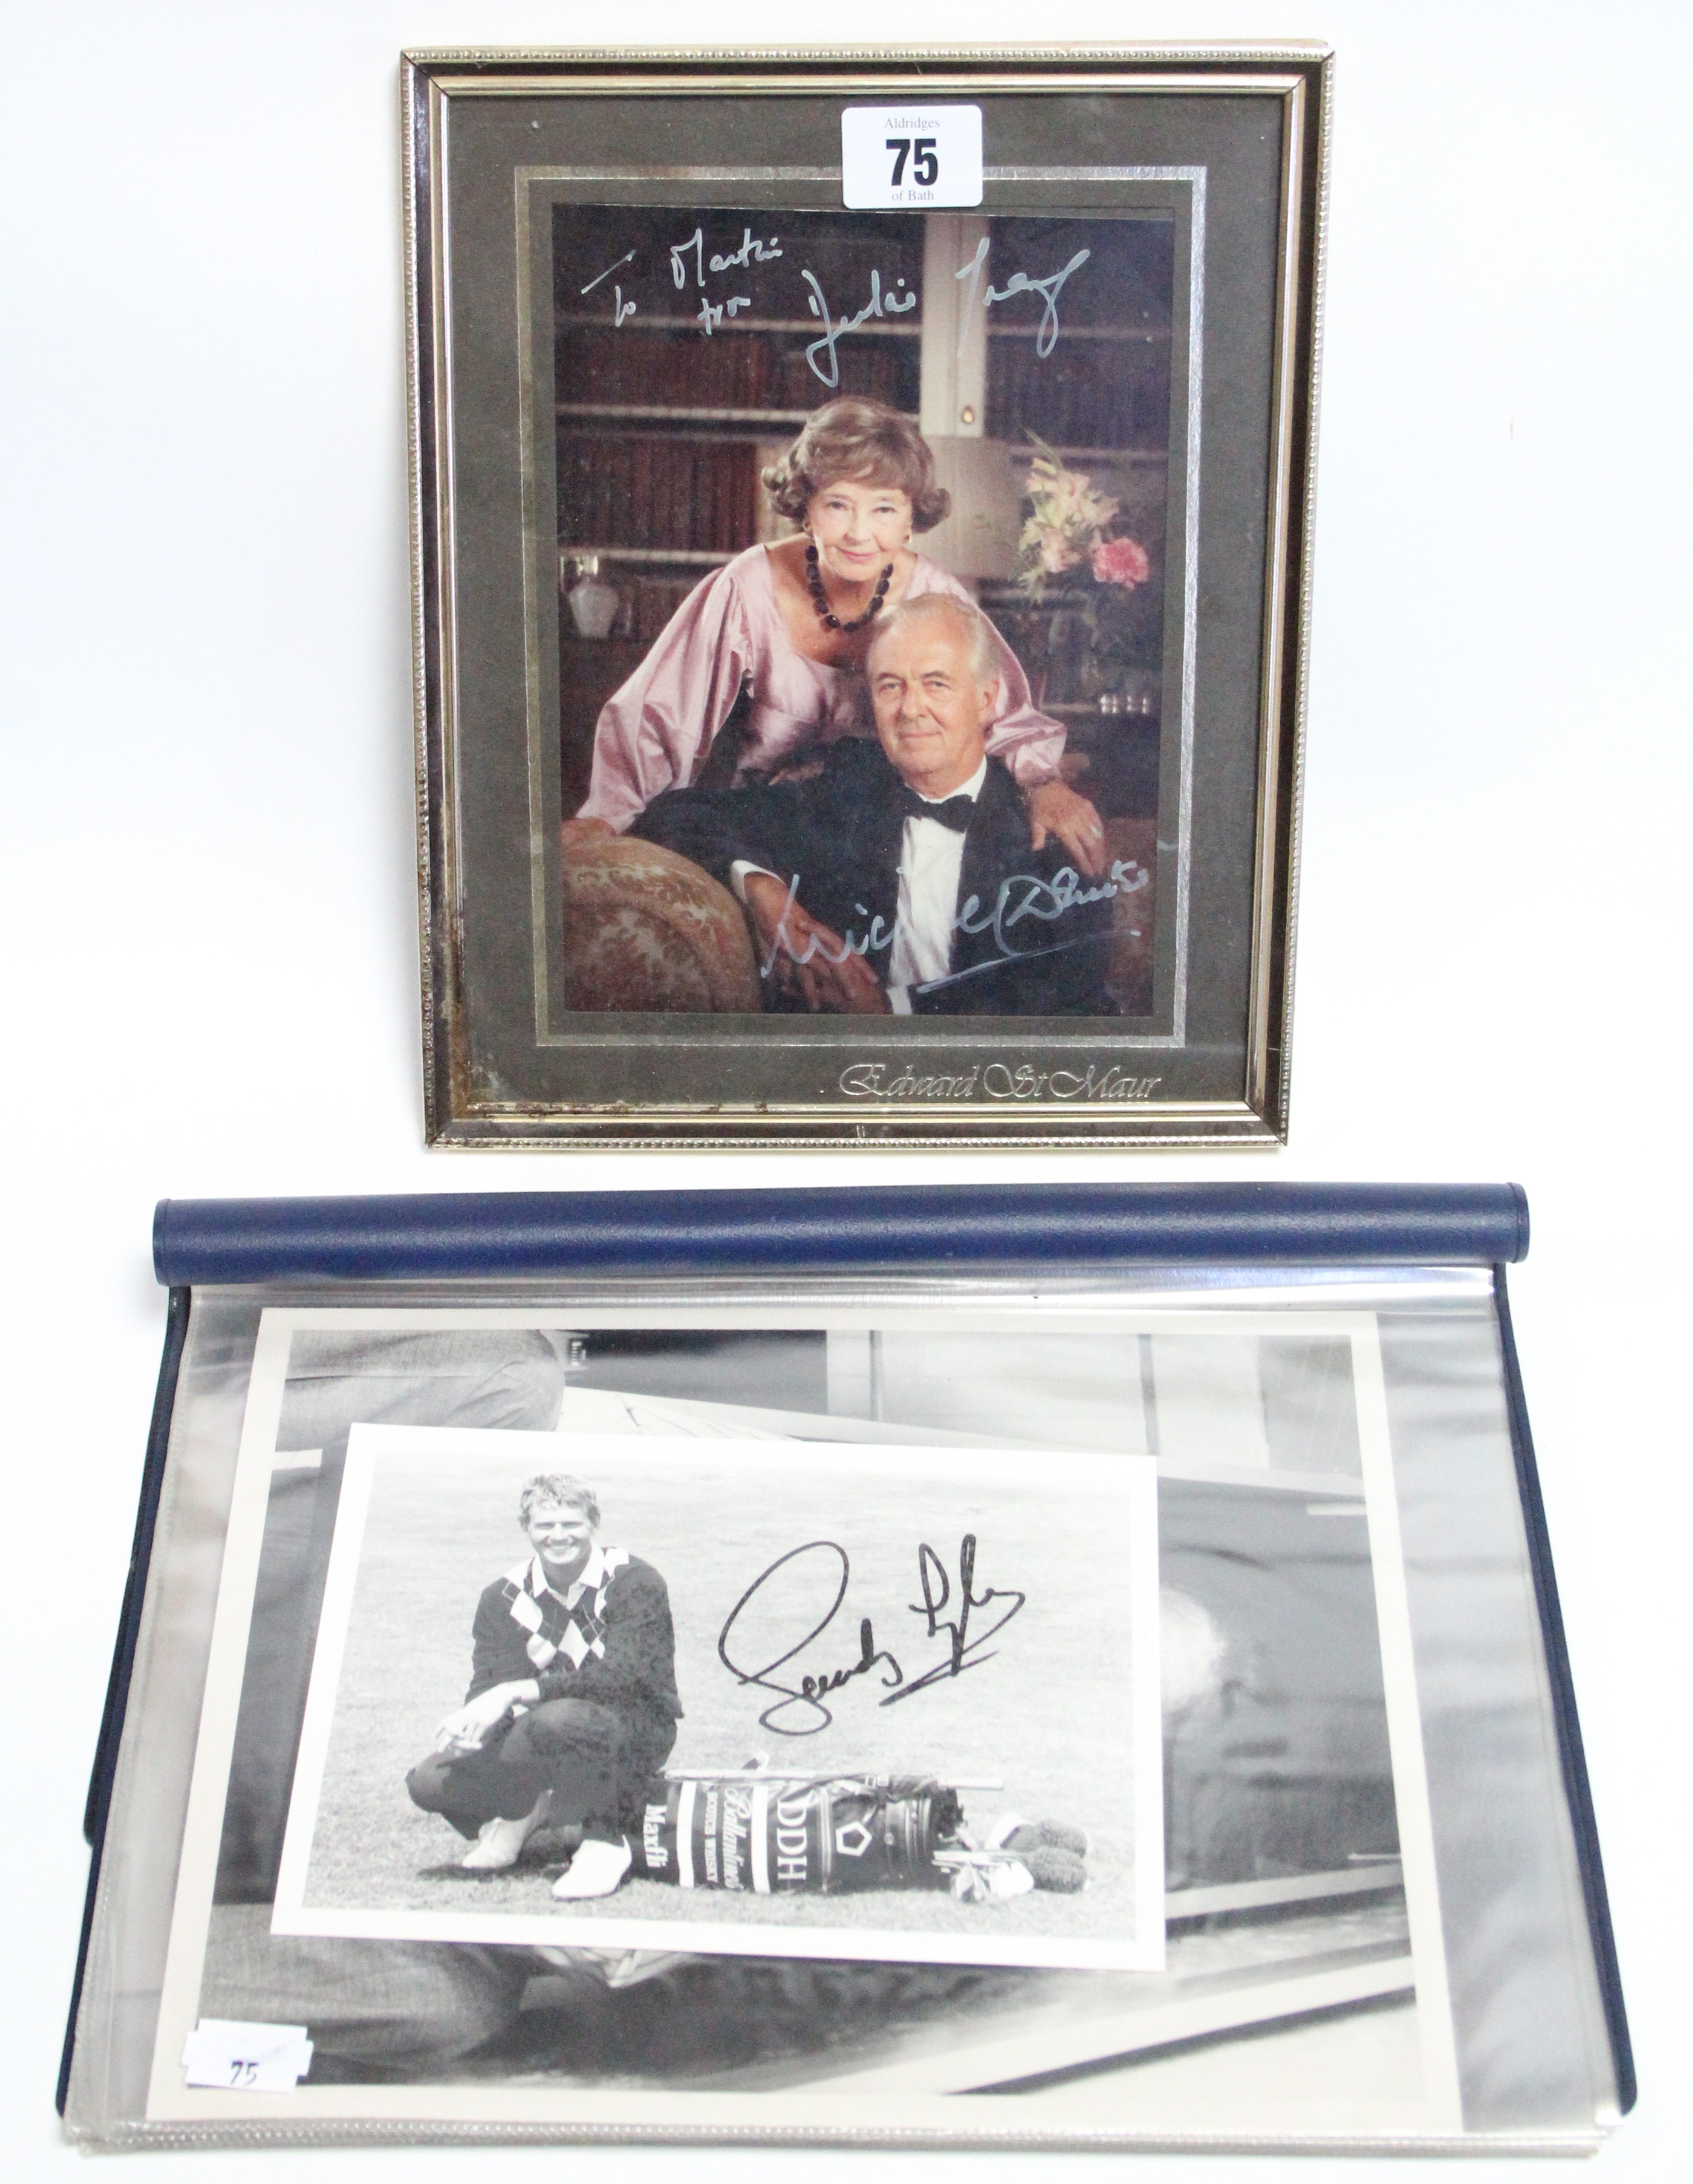 A collection of autographs, most on photographs, including Laurence Olivier, Charlton Heston,